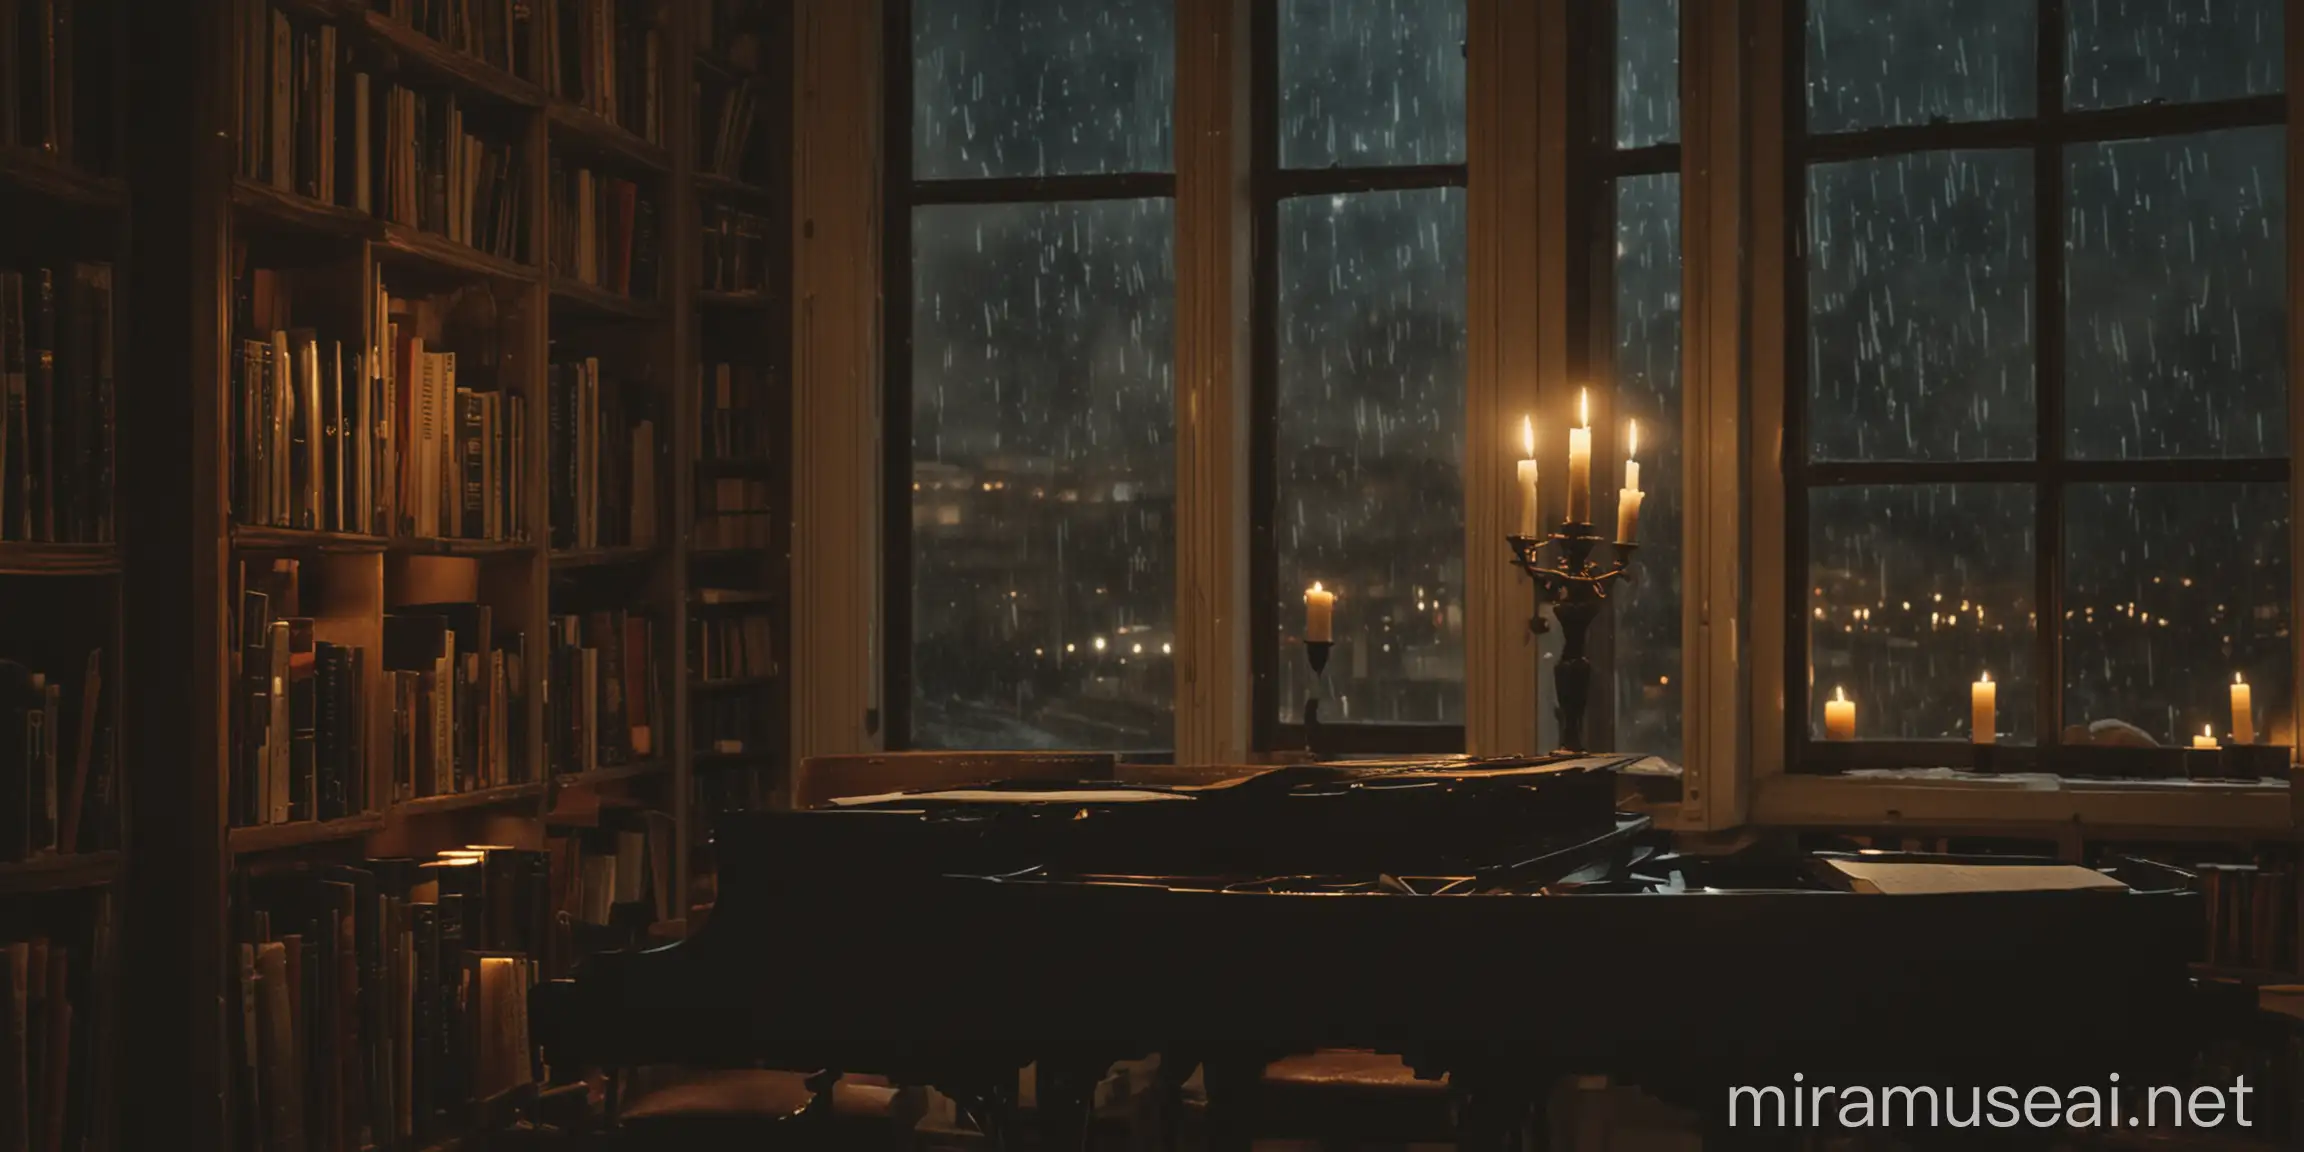 Pianist Playing Vivaldi by Candlelight in a Library During Storm